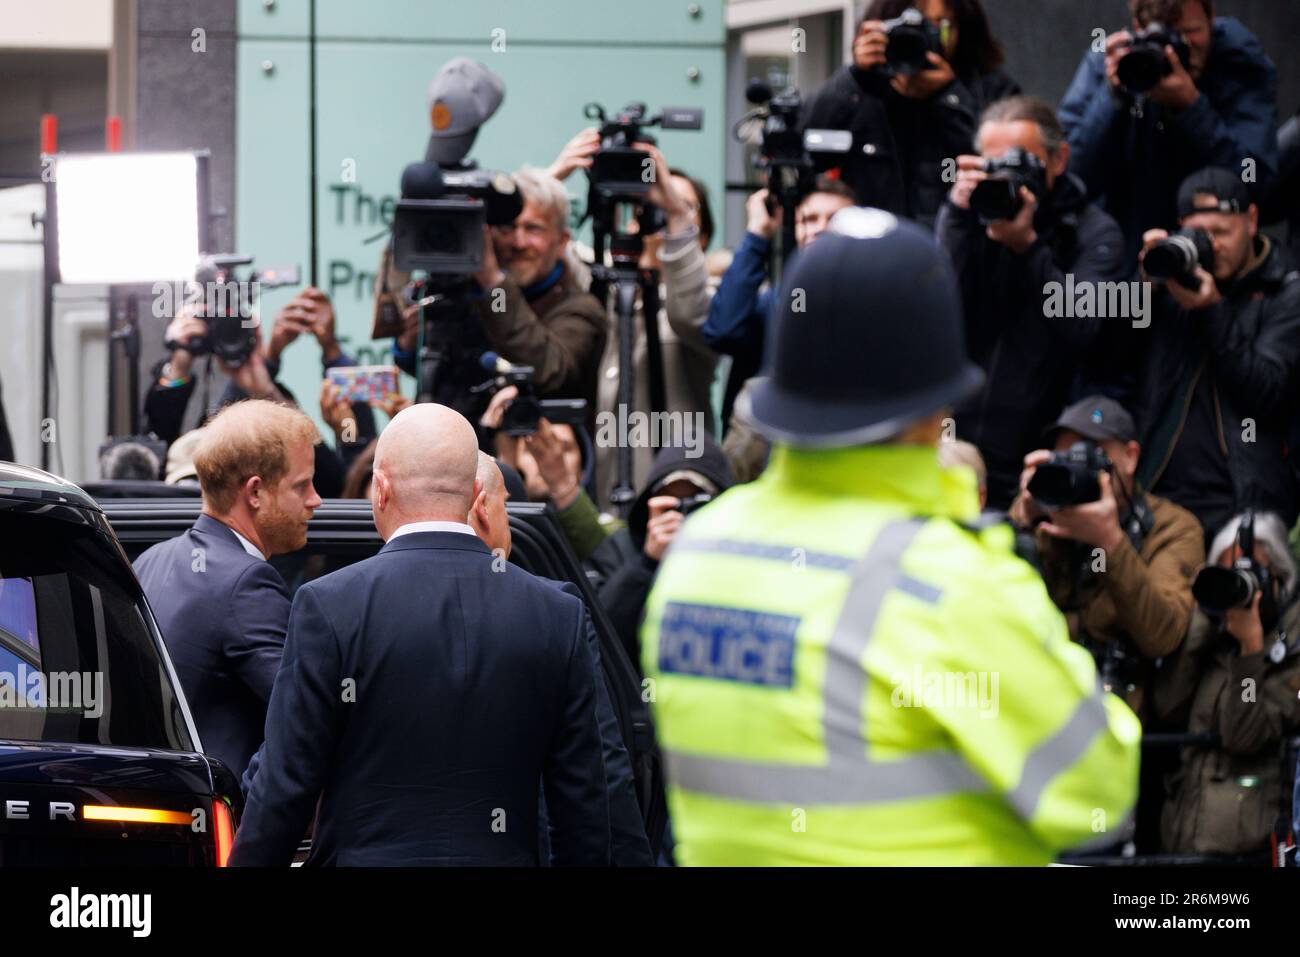 Prince Harry arrives at the High Court this morning ahead of the third day of trial against Mirror Group Newspapers.   Image shot on 7th June 2023.  © Stock Photo